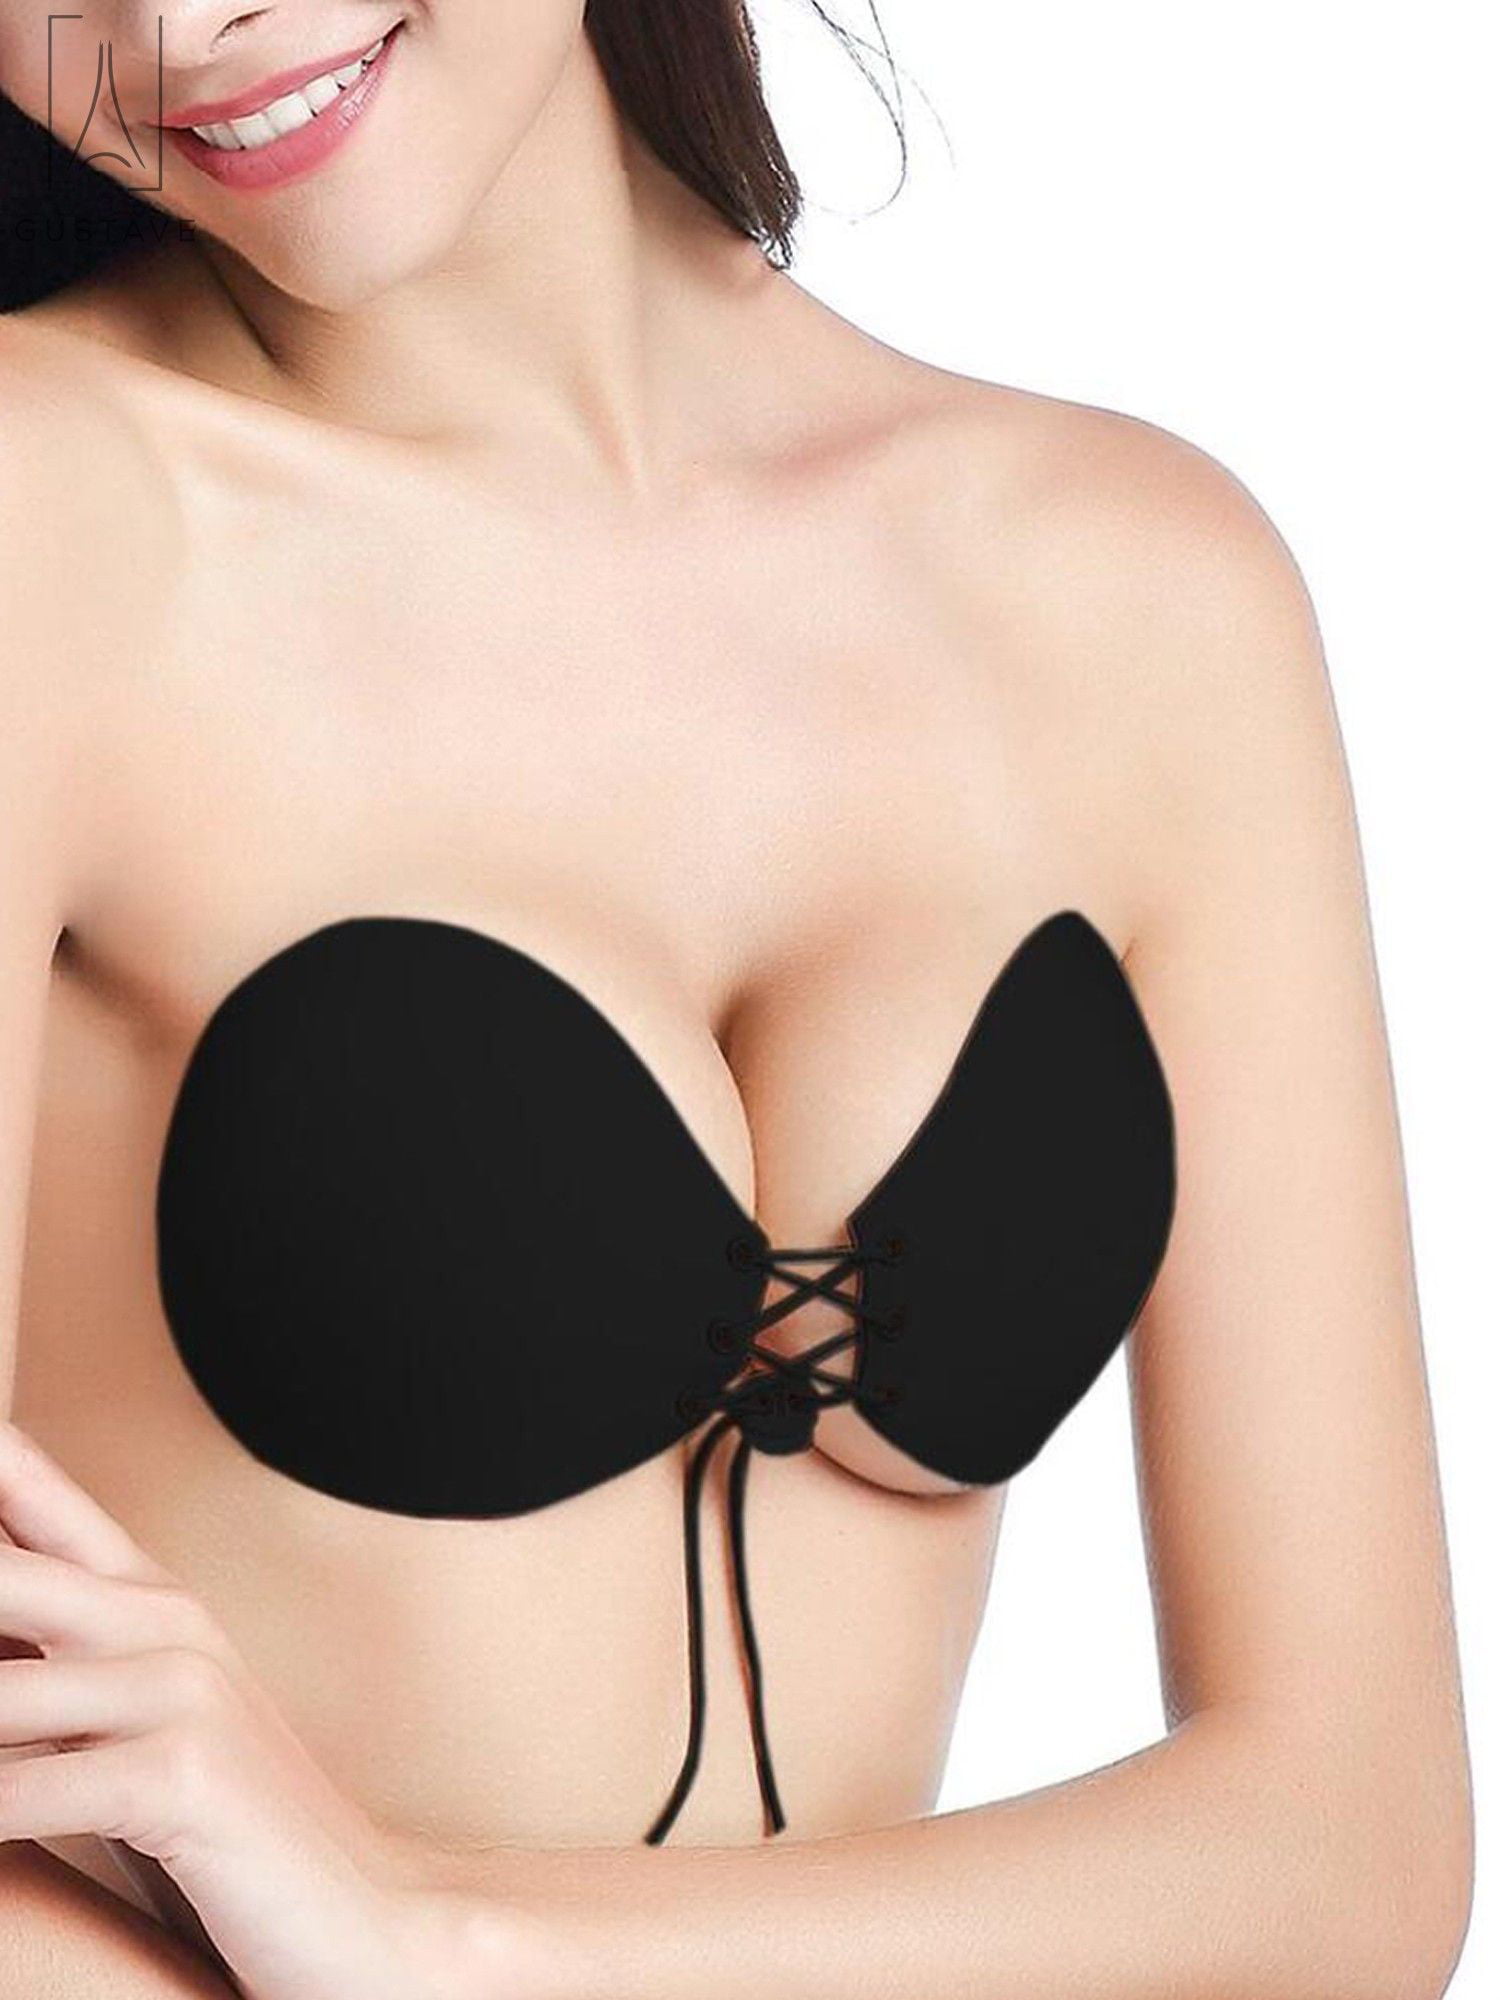 silicone bra cups backless dress invisible